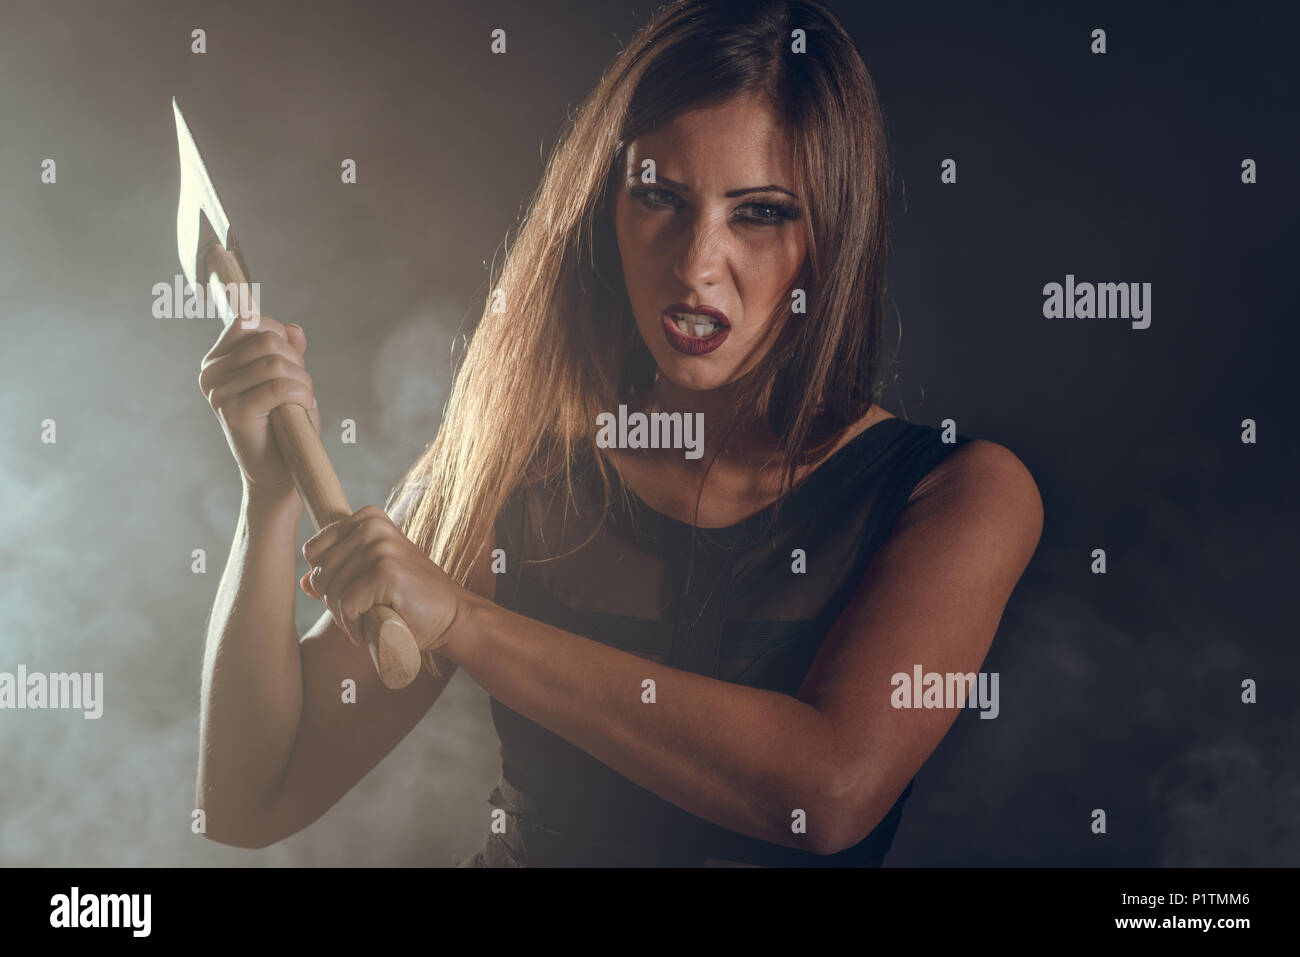 Beautiful dangerous girl with rusty axe want to revenge for violence she experience. Looking at camera. Stock Photo